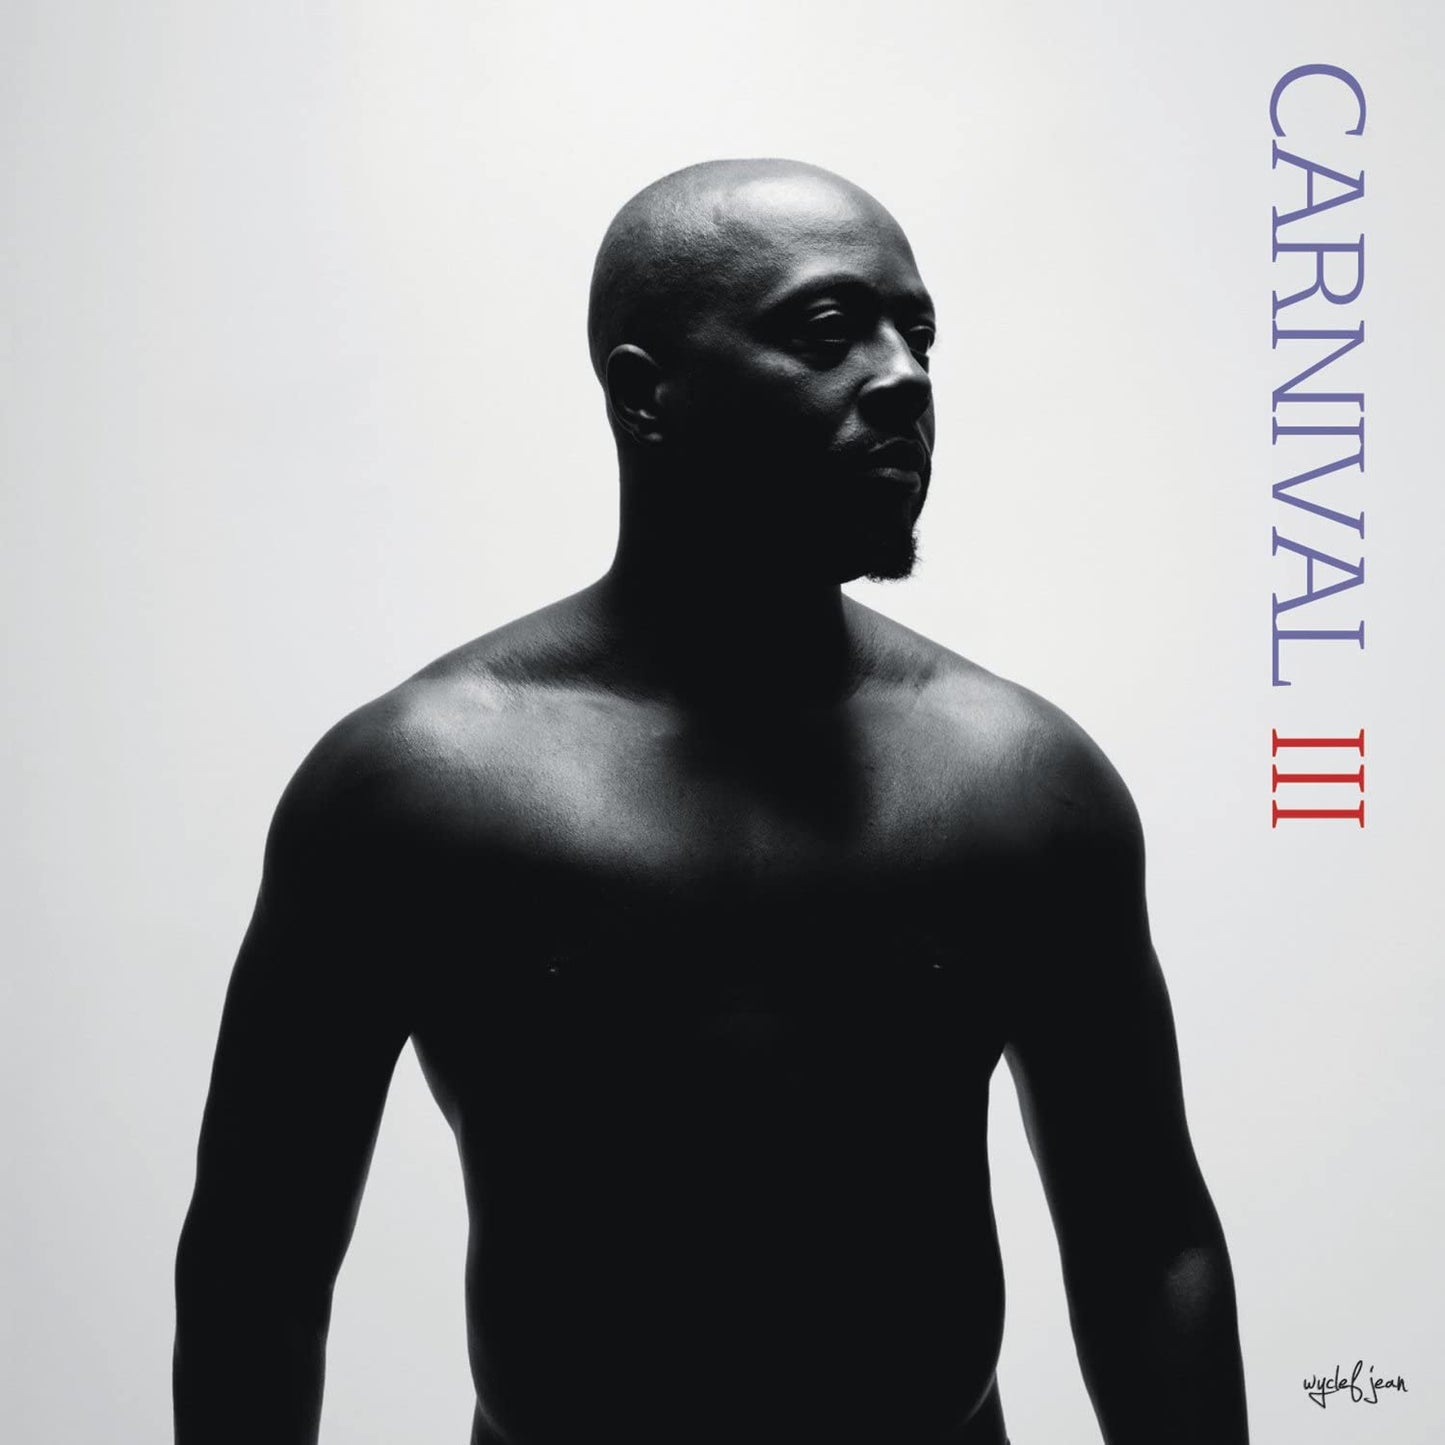 Carnival Iii: The Fall And Rise Of A Refugee [Audio CD] Wyclef Jean and Multi-Artistes